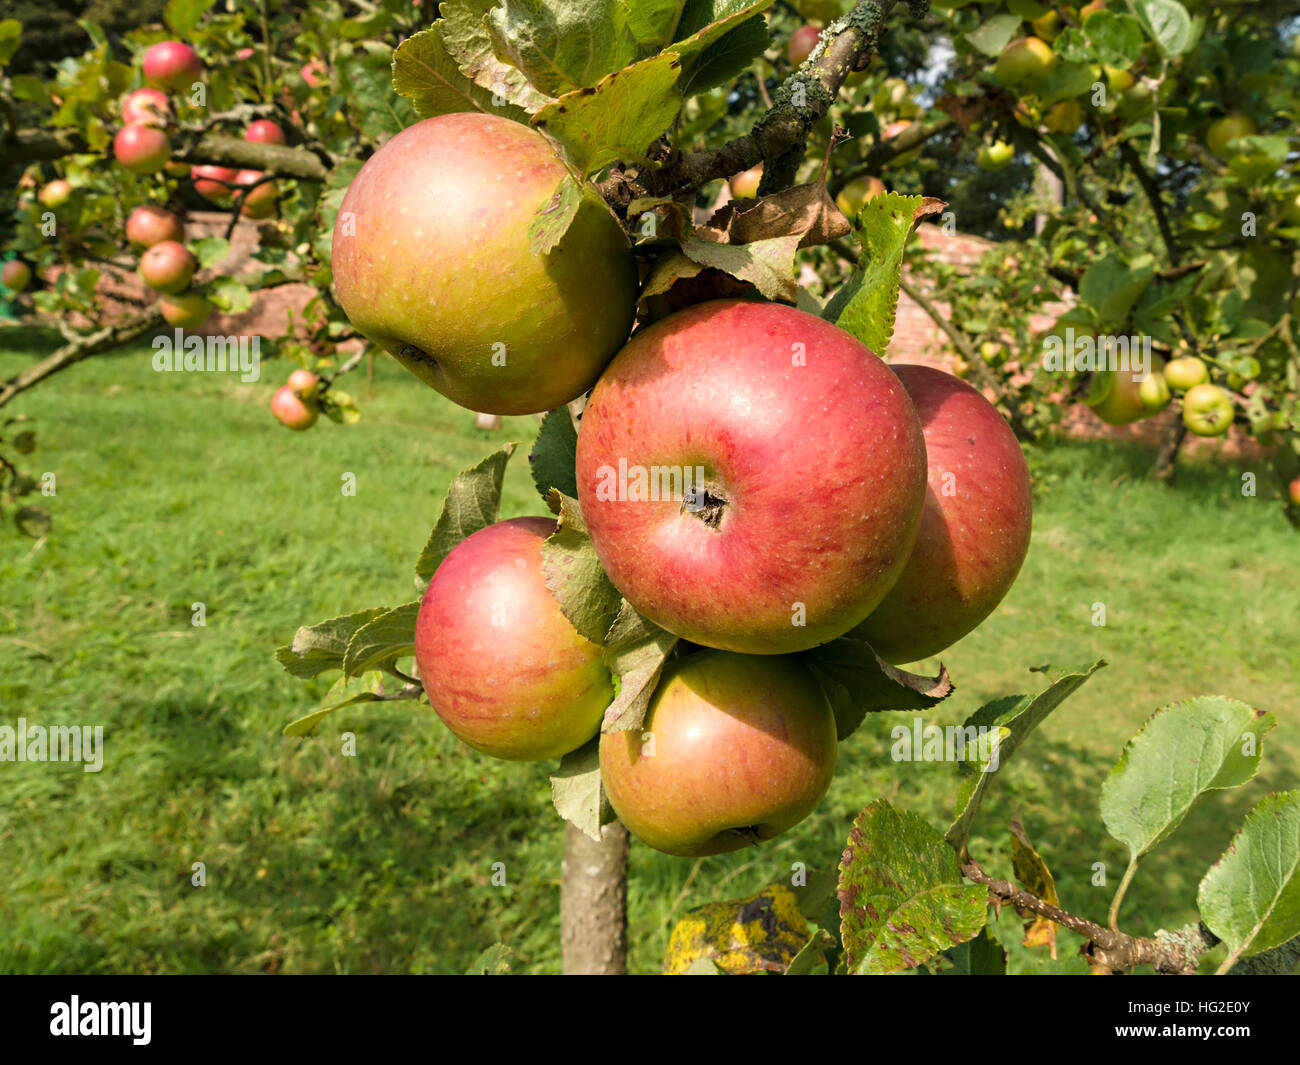 Bunch of Malus domestica Newton Wonder cooking apples growing on apple tree in orchard, UK. Stock Photo